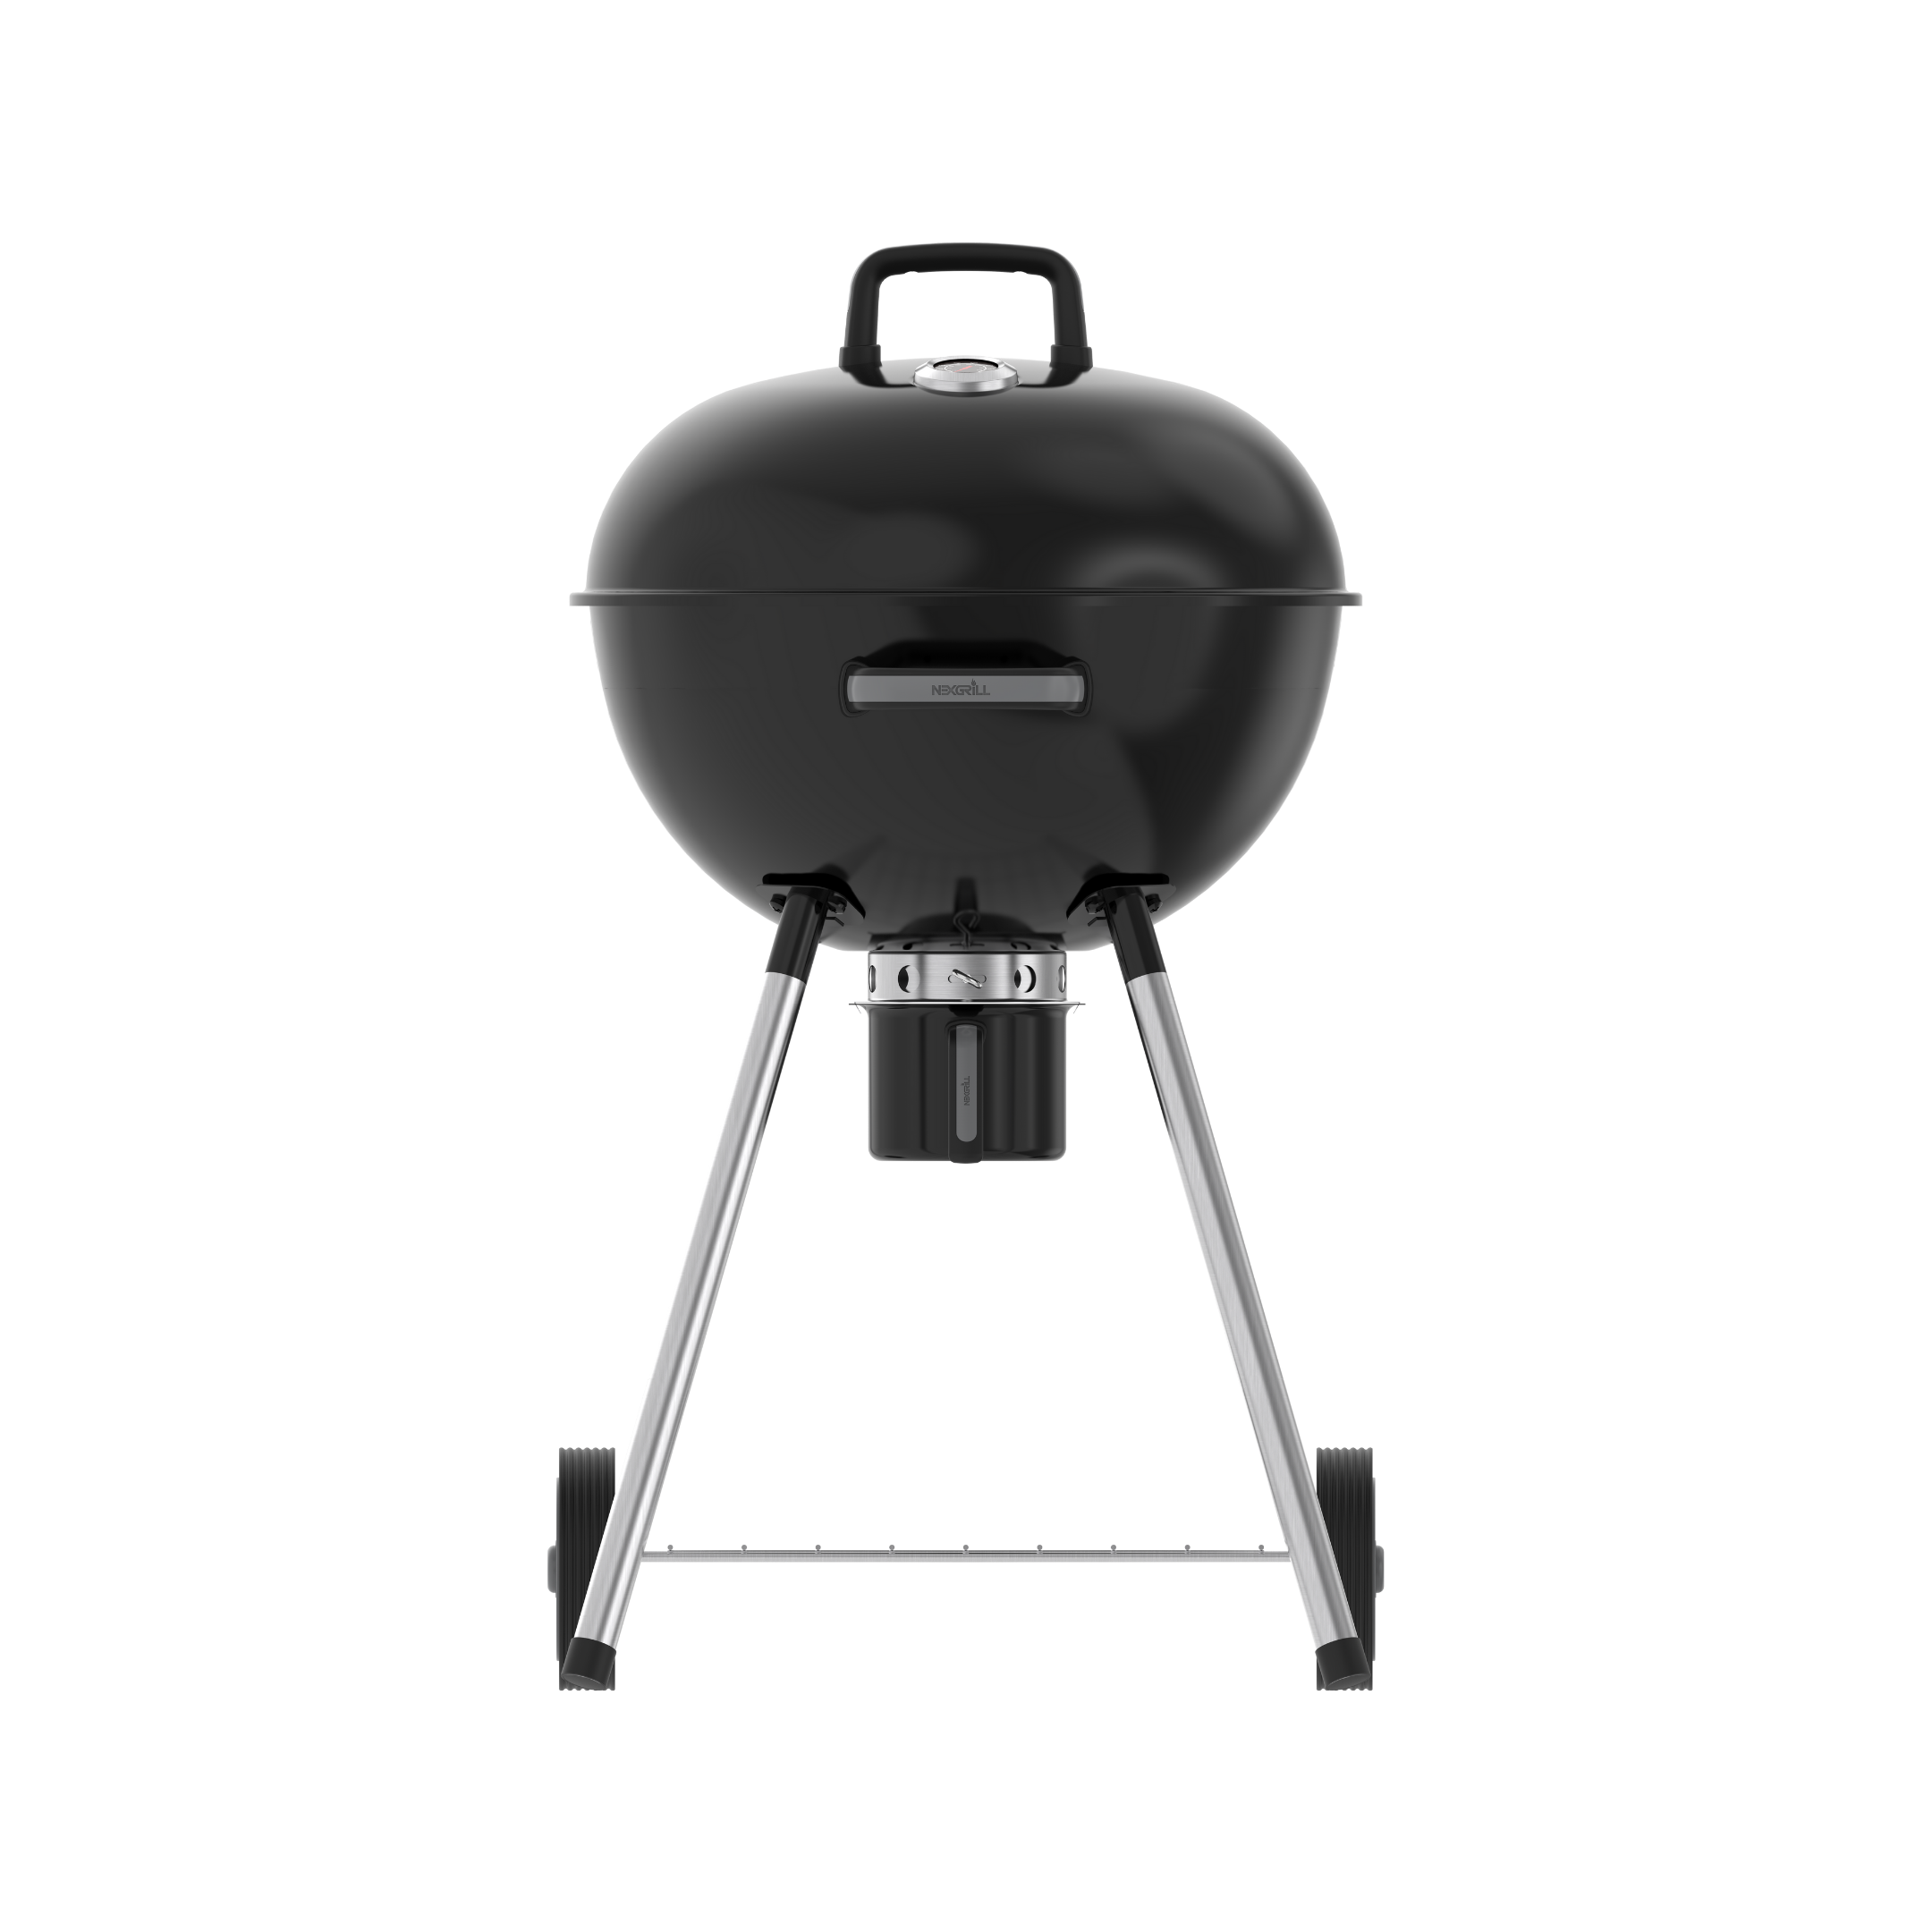 22" Premium Charcoal Kettle Grill